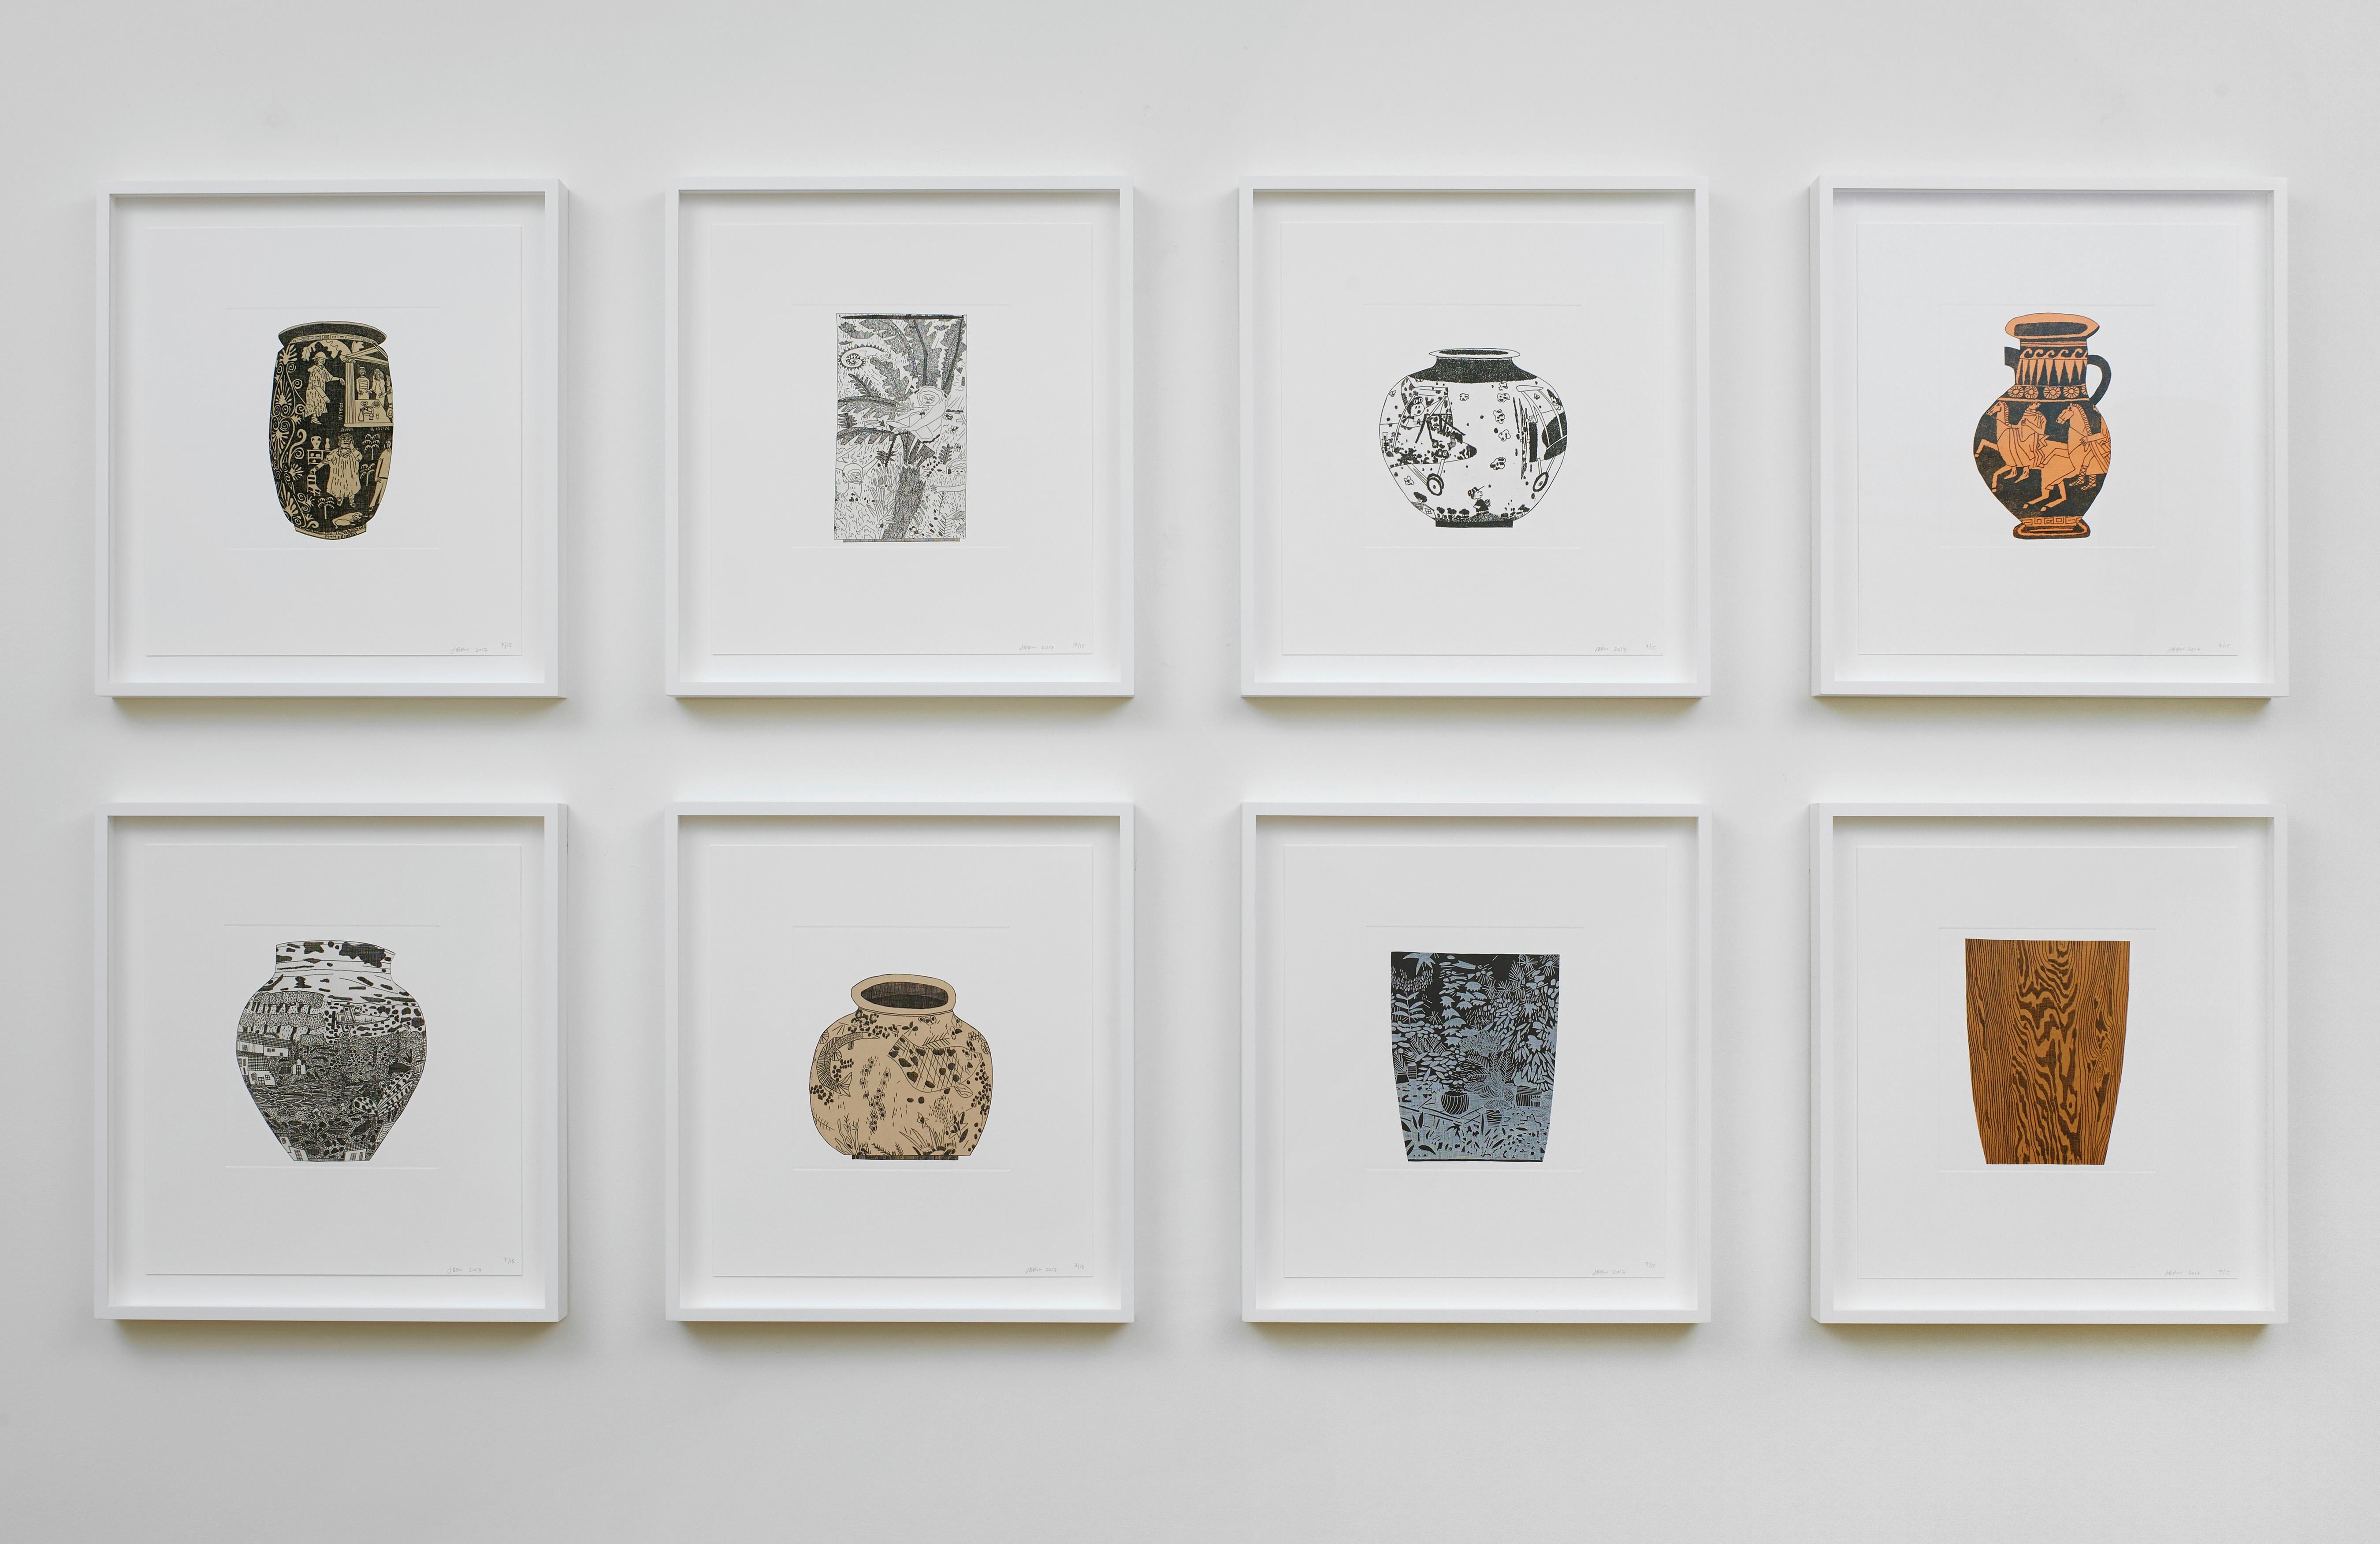 Jonas Wood 
8 Pots, 2017
Etching with chin-collé on White Satin Somerset paper, in 8 parts
40.6 x 35.6 cm
16 x 14 in
Edition 7 of 15 (+ 3 APs)